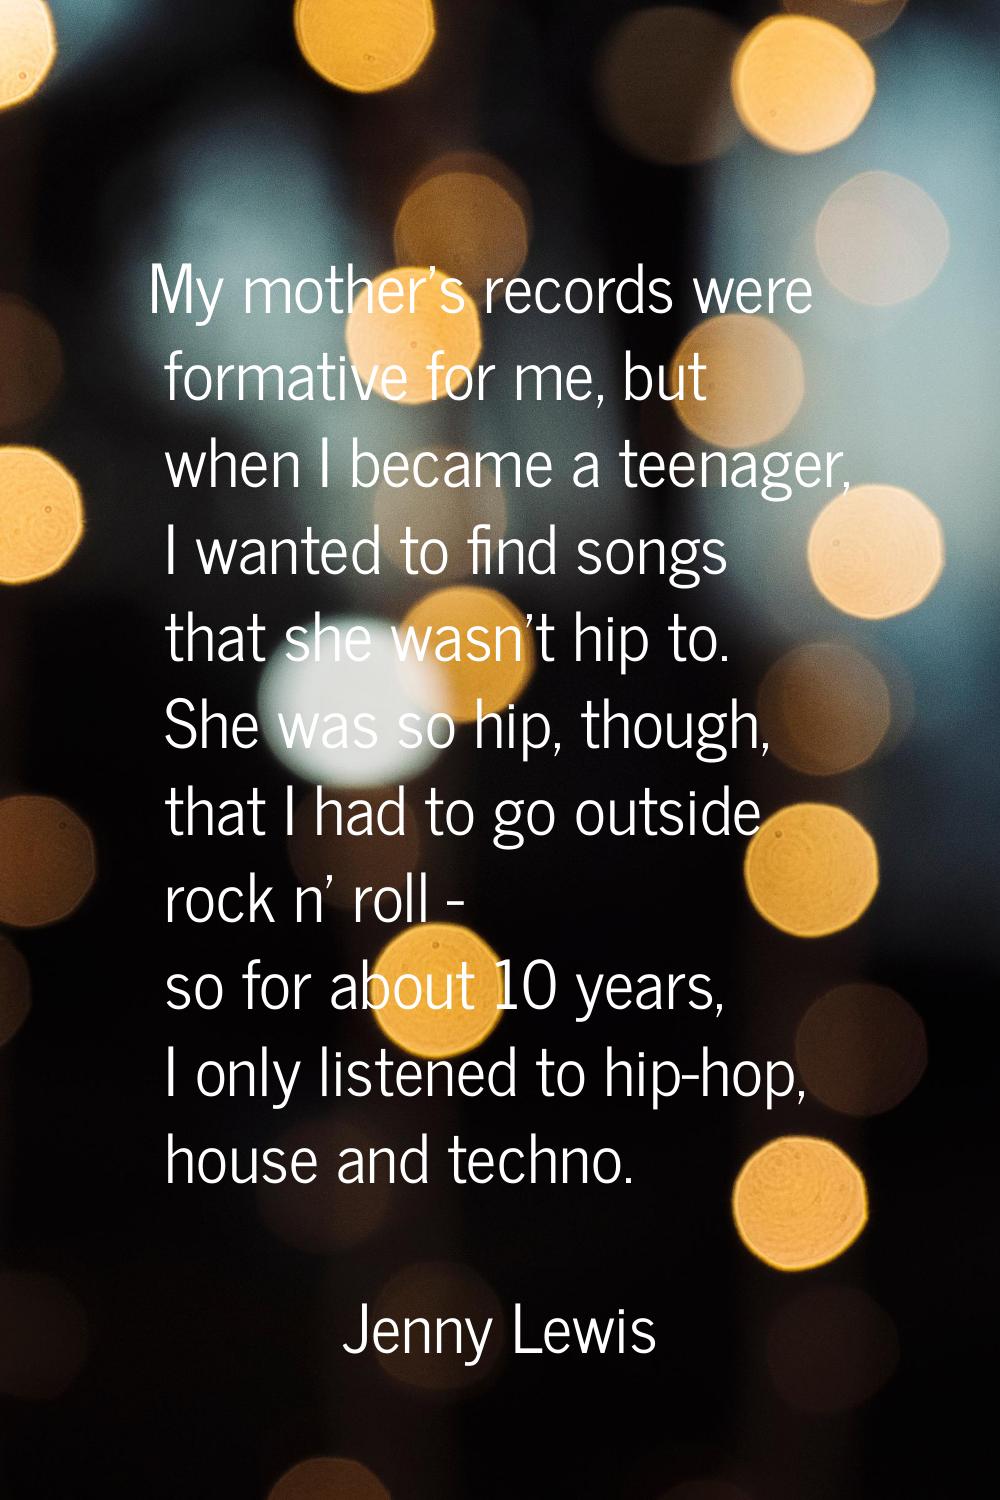 My mother's records were formative for me, but when I became a teenager, I wanted to find songs tha